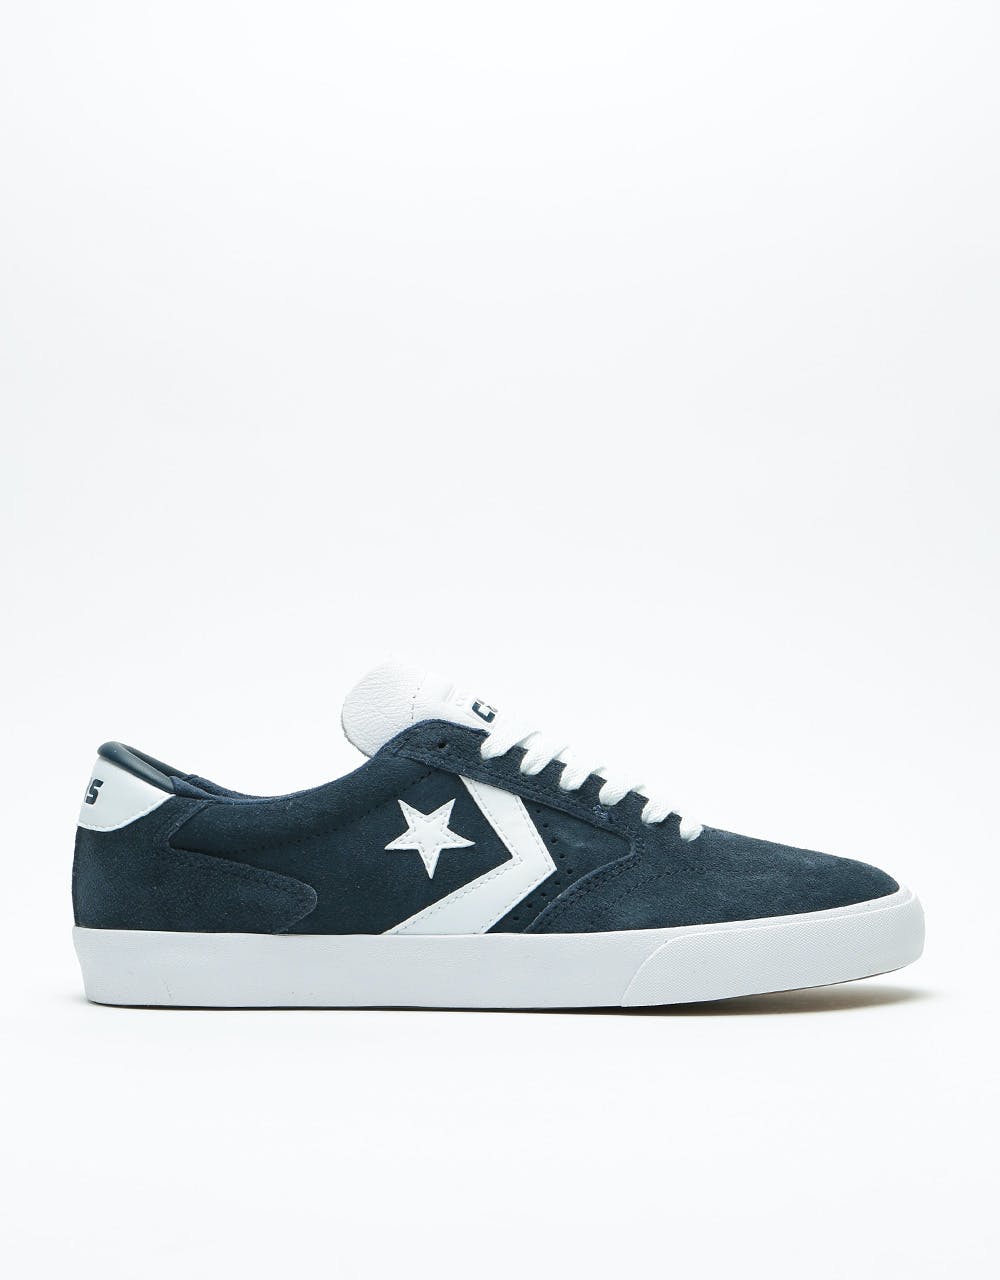 Converse Checkpoint Pro Ox Suede Skate Shoes - Obsidian/Wolf Grey/Whit